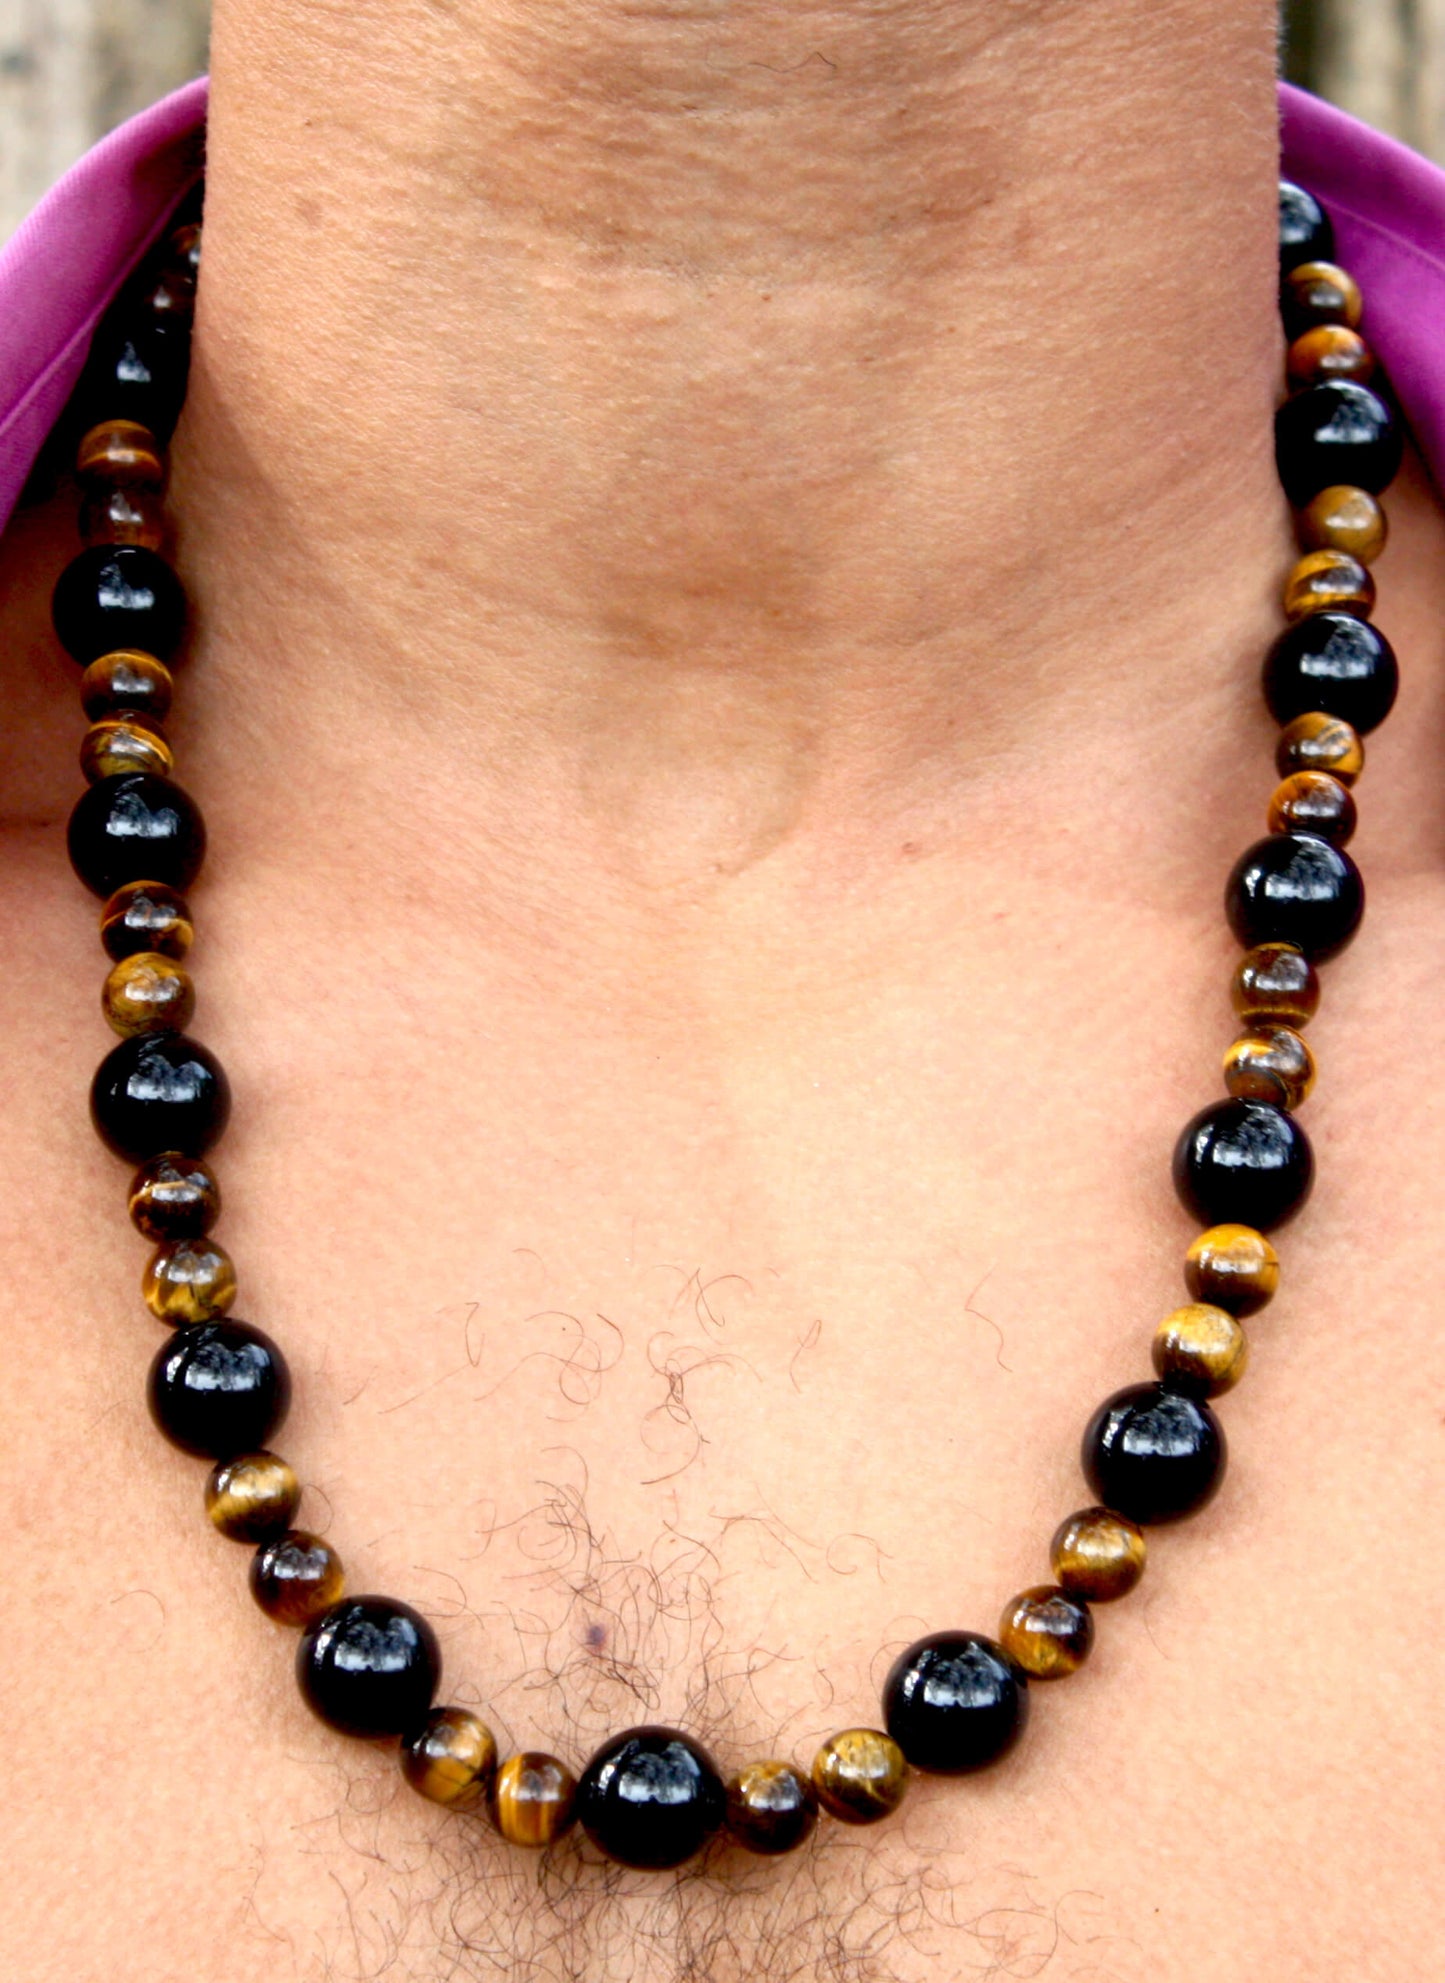 Black Onyx and Yellow Tiger Eye Necklace 24 inch